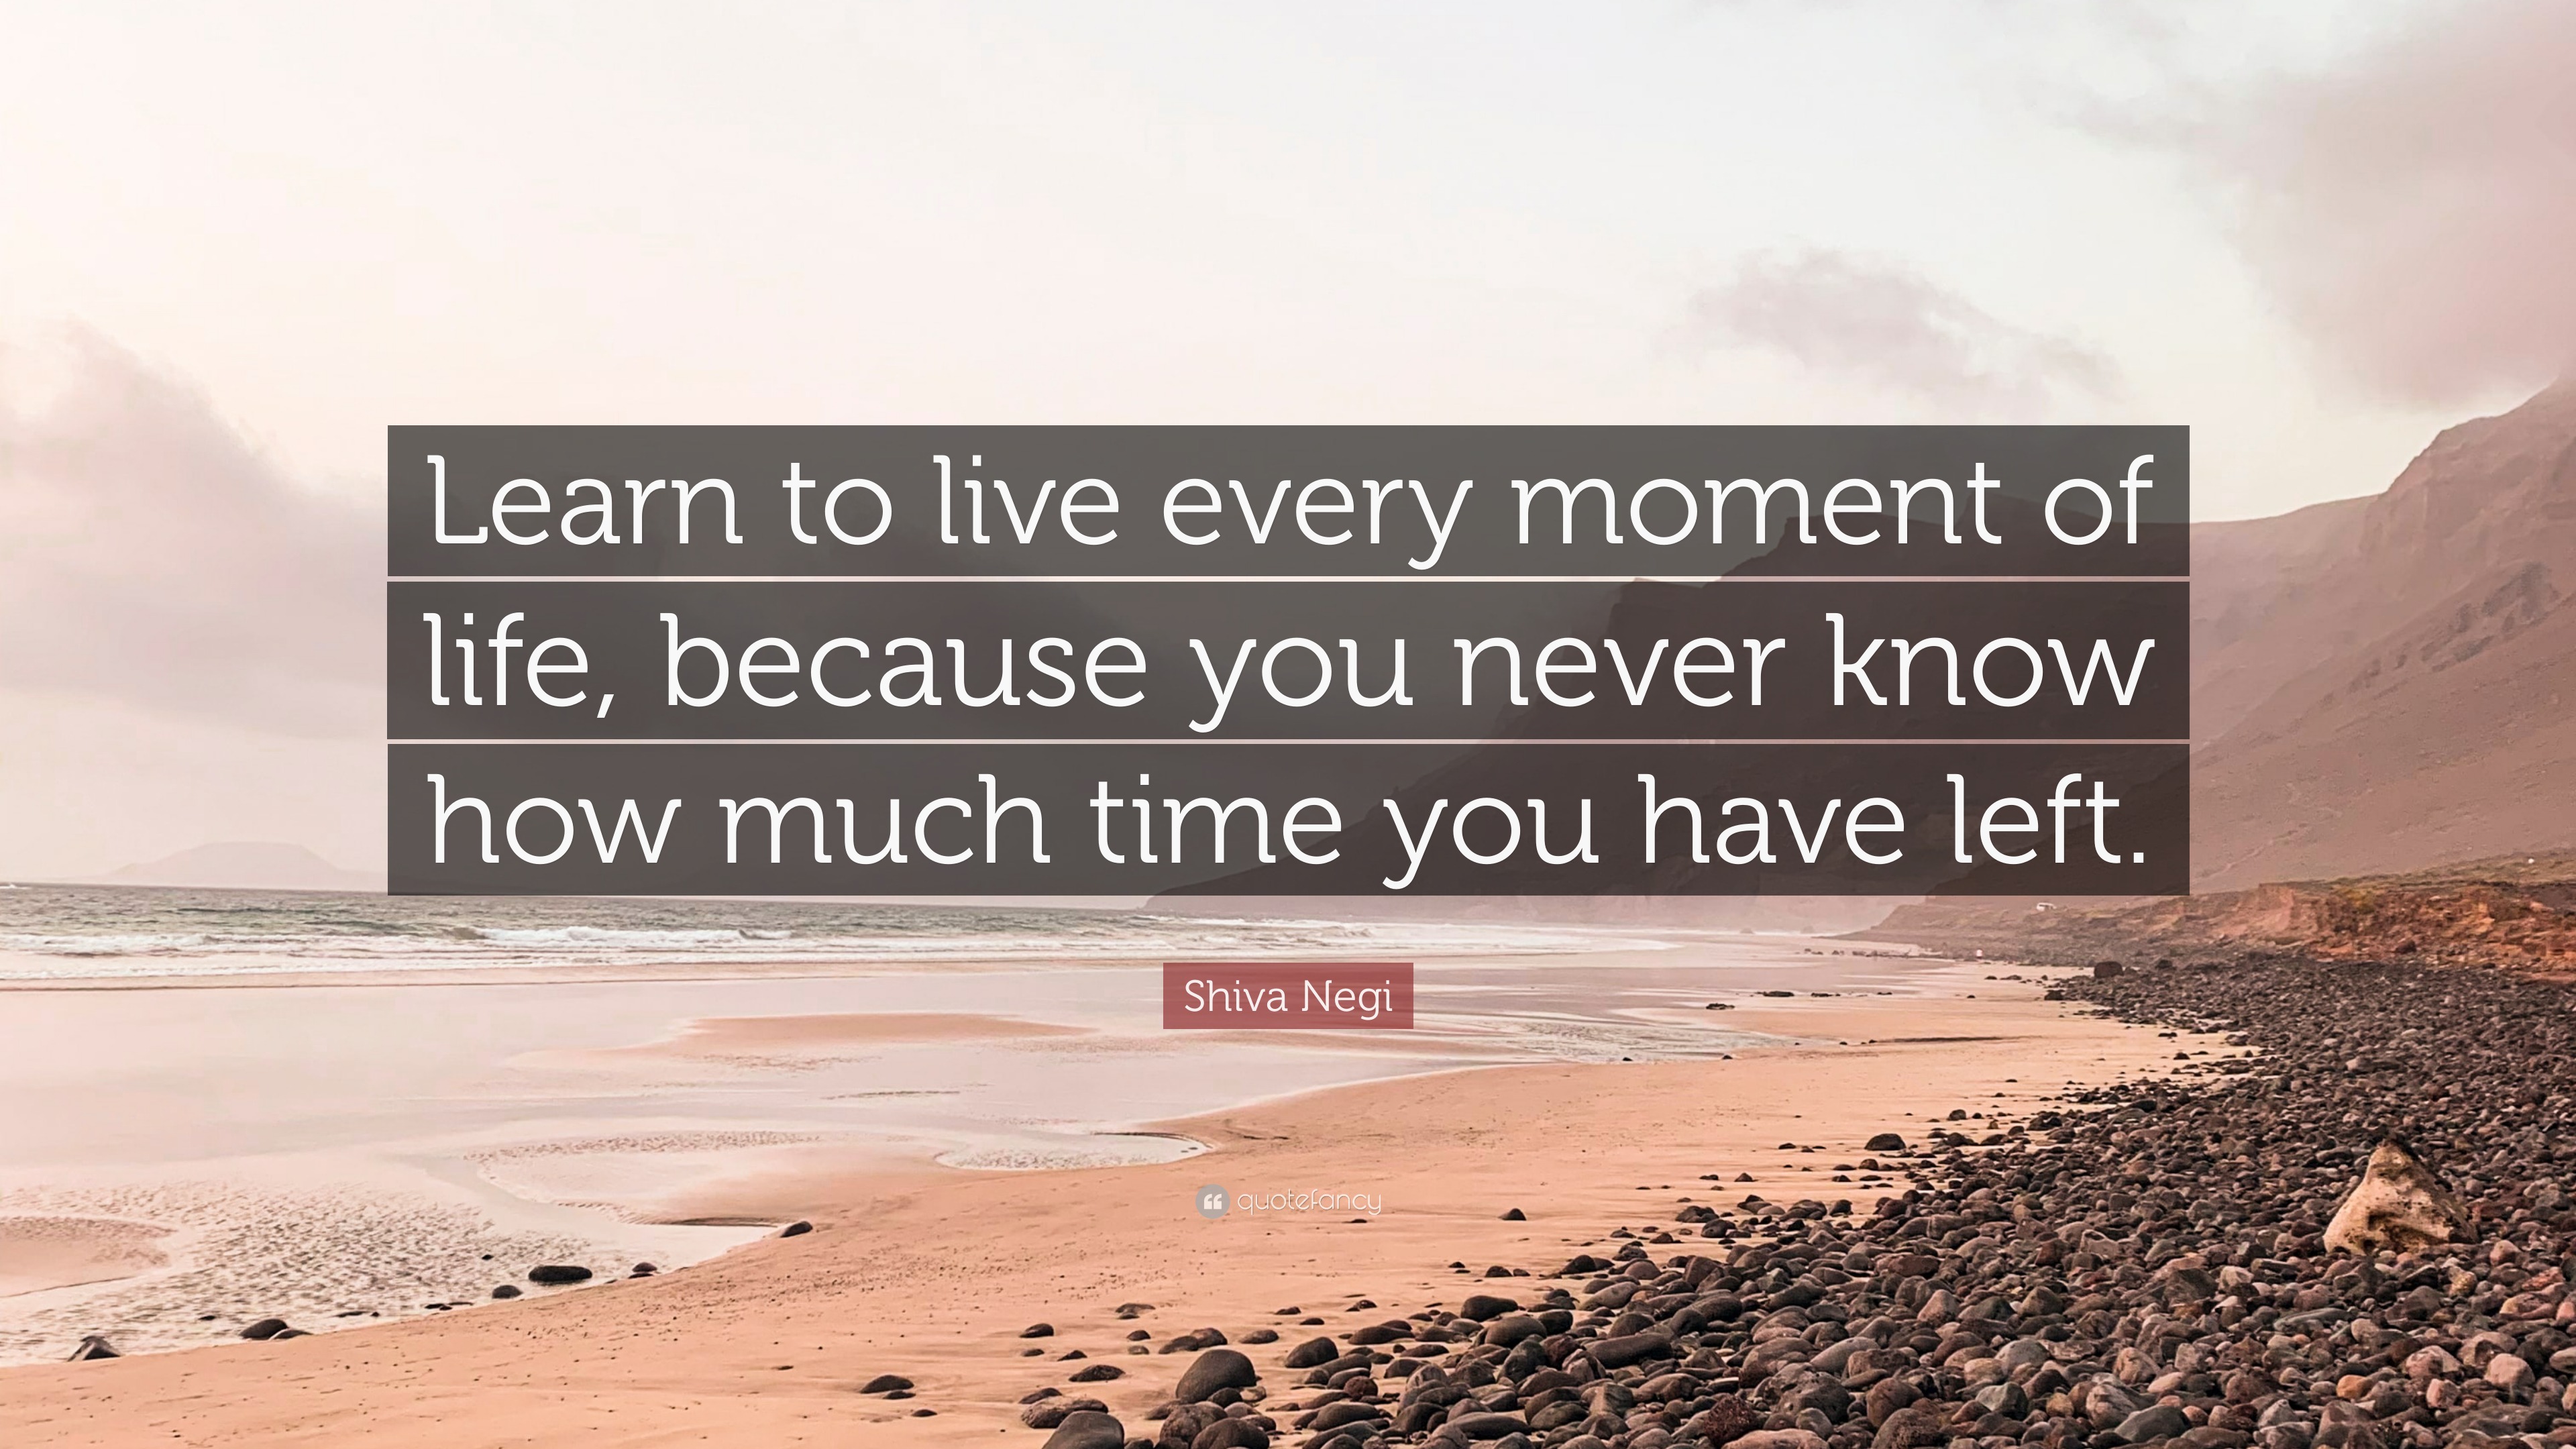 Shiva Negi Quote: “Learn to live every moment of life, because you ...